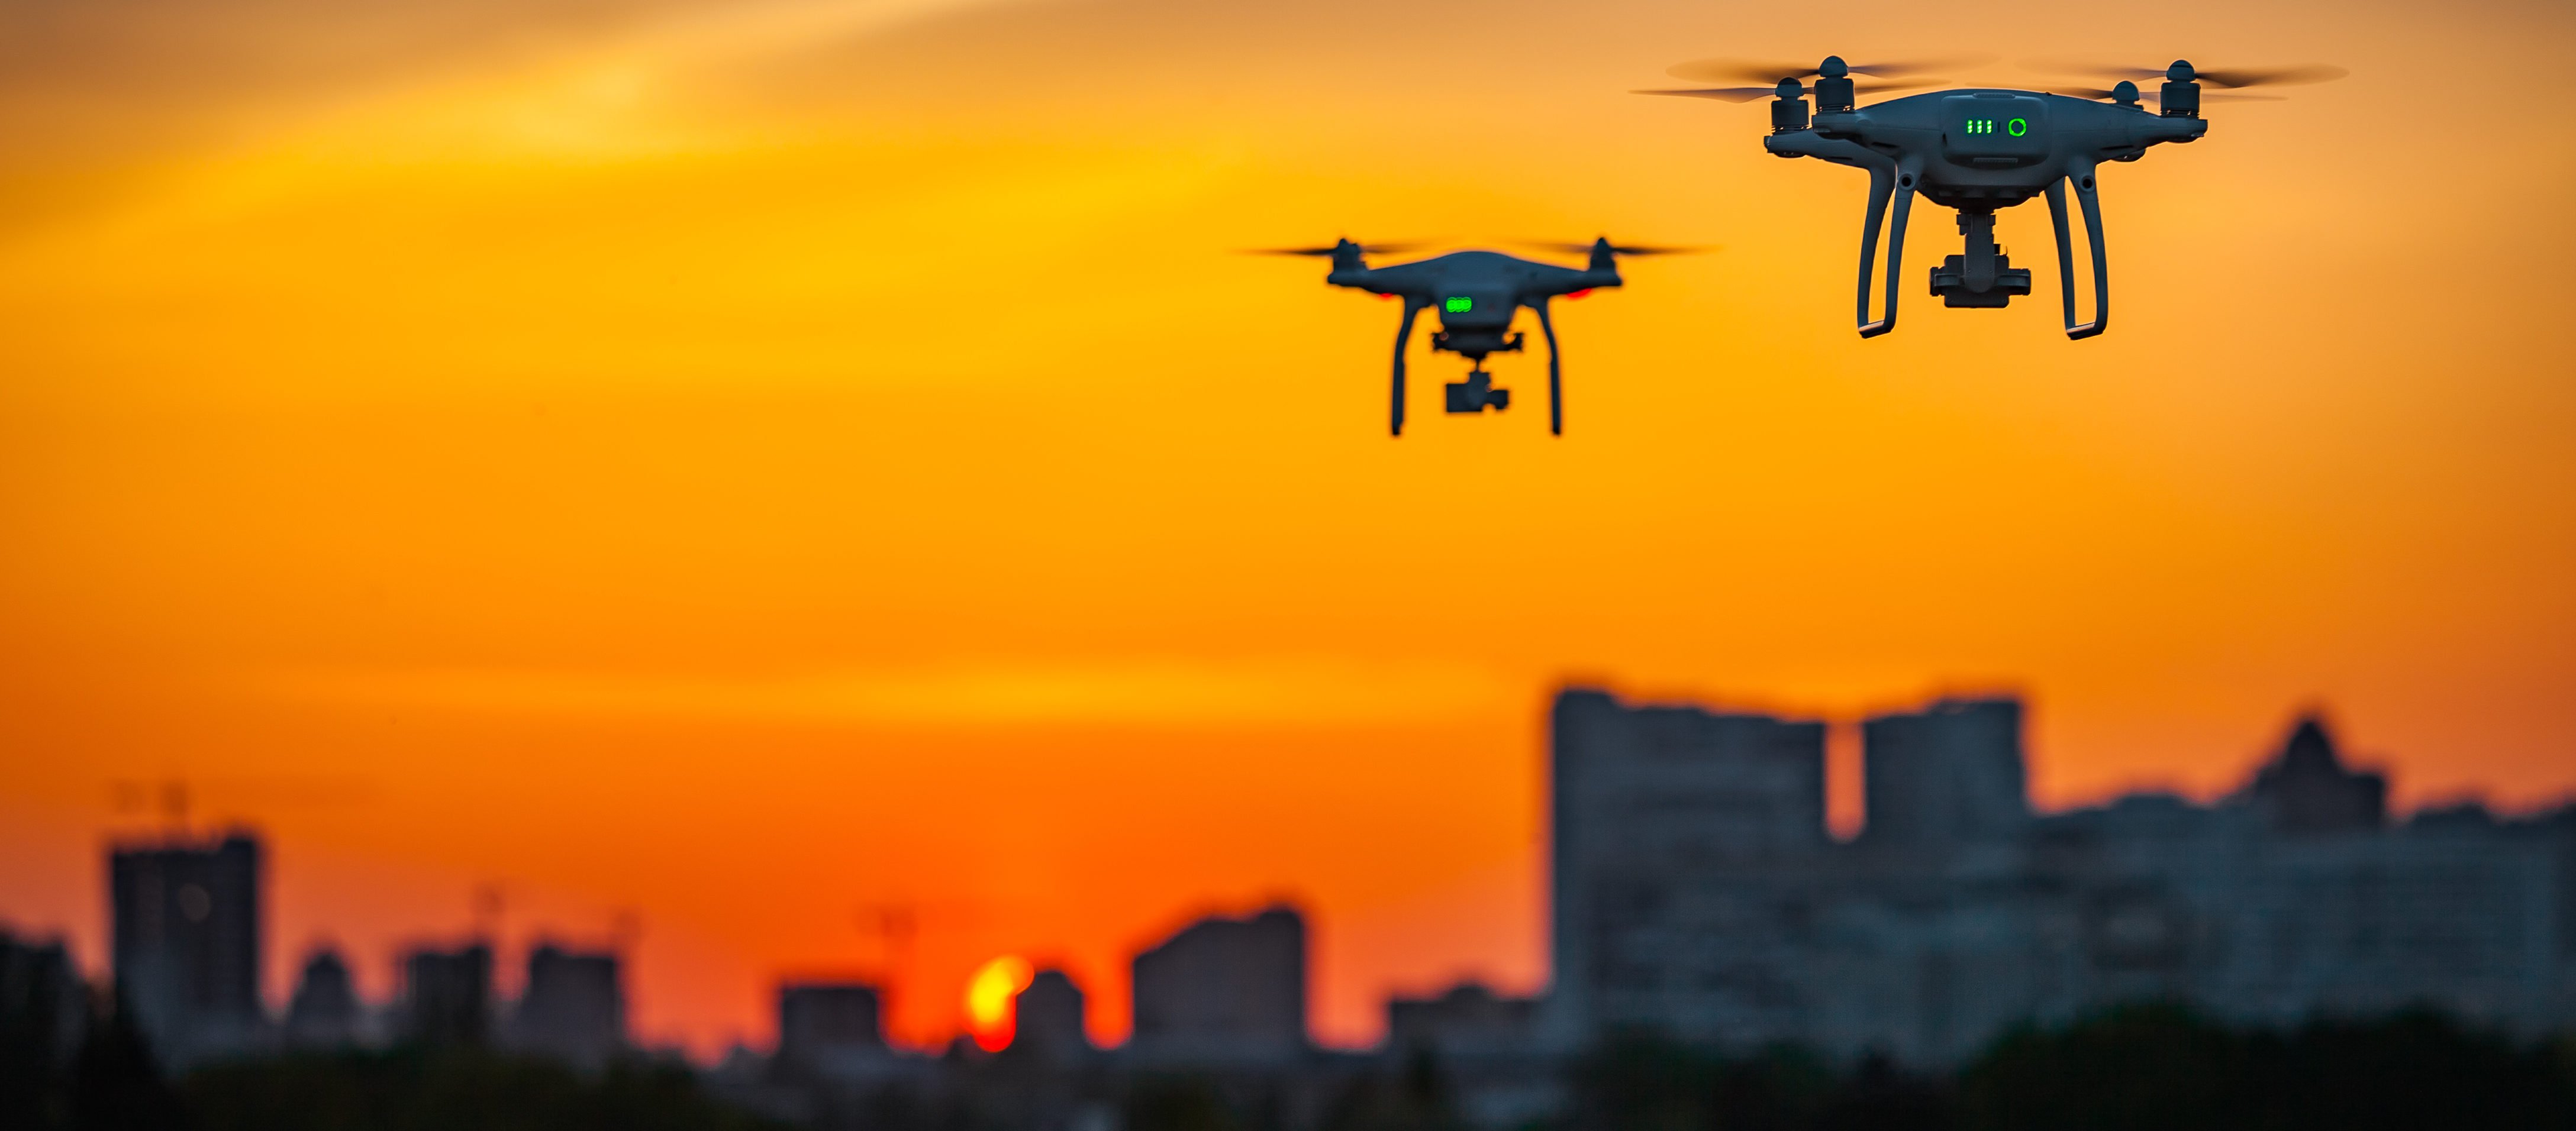 Drones fly above a city at night. (Shutterstock/Volodymyr Goinyk)